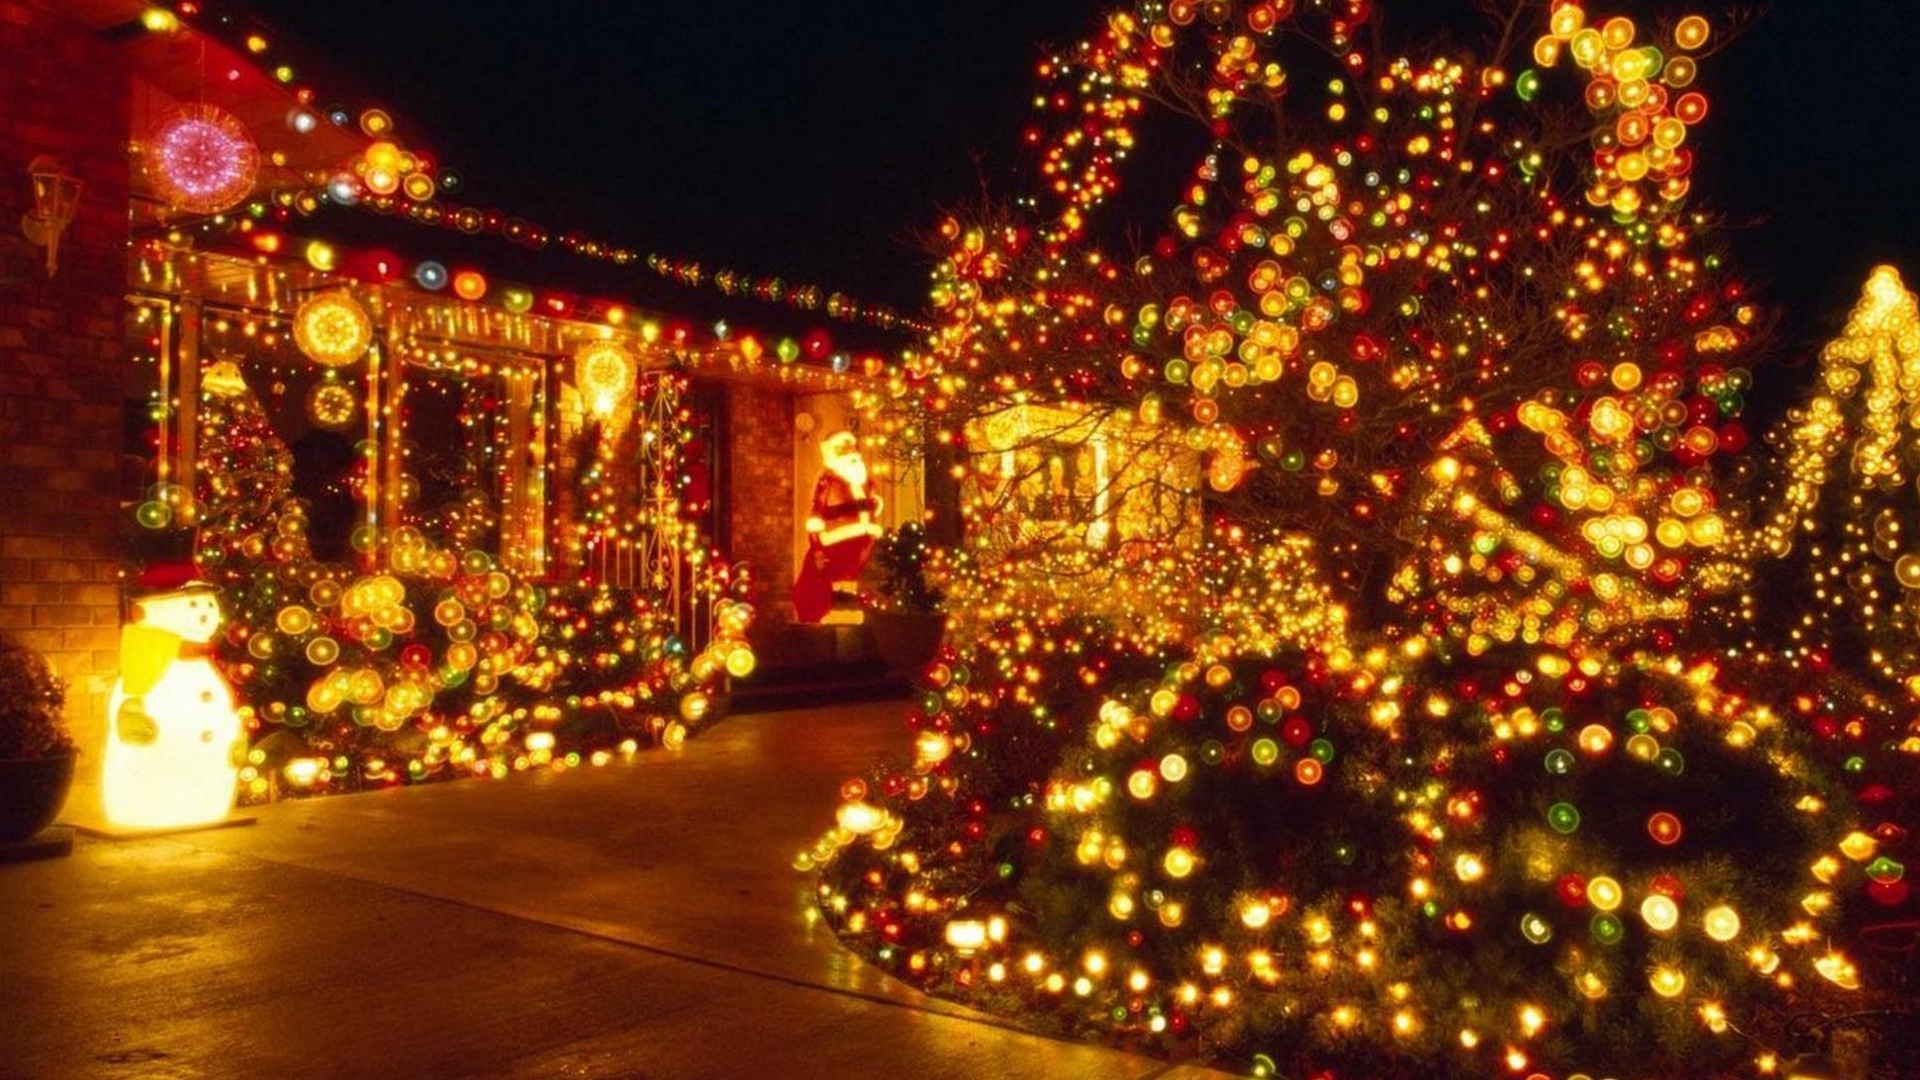 Christmas Lights Wallpaper Pictures Pics Photos Image